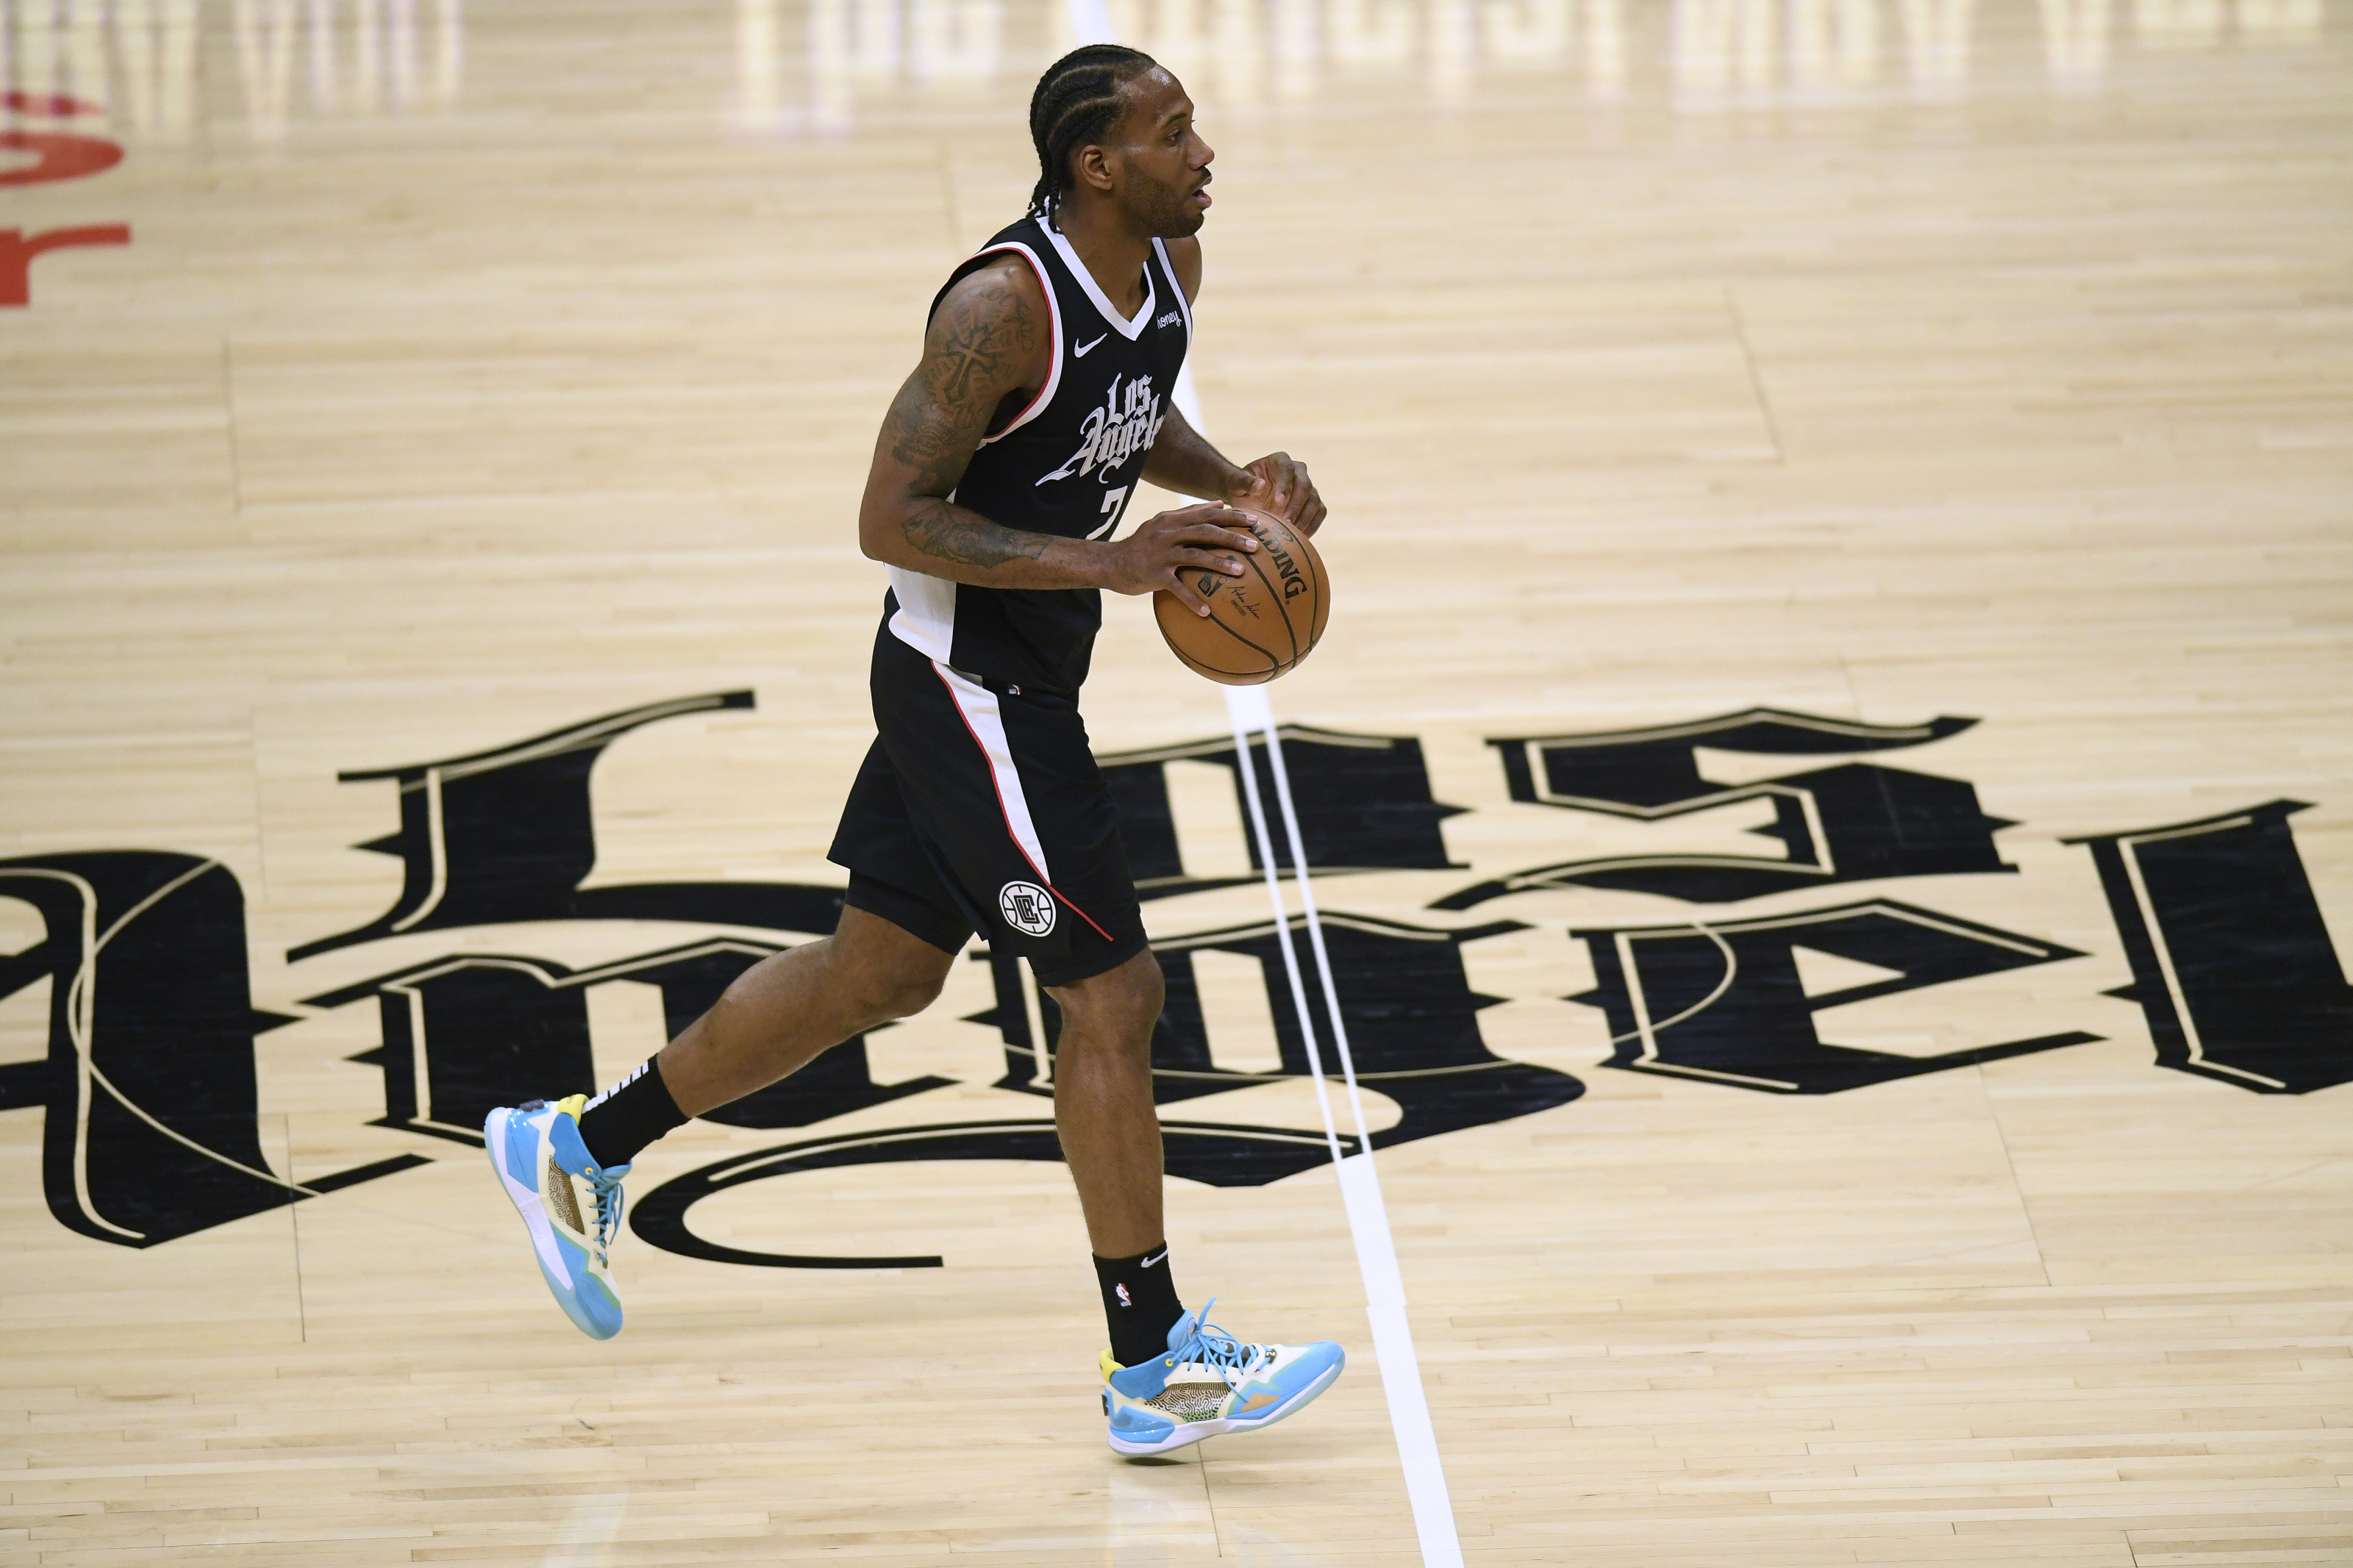 Kawhi Leonard 2021 Pictures and Photos - Getty Images